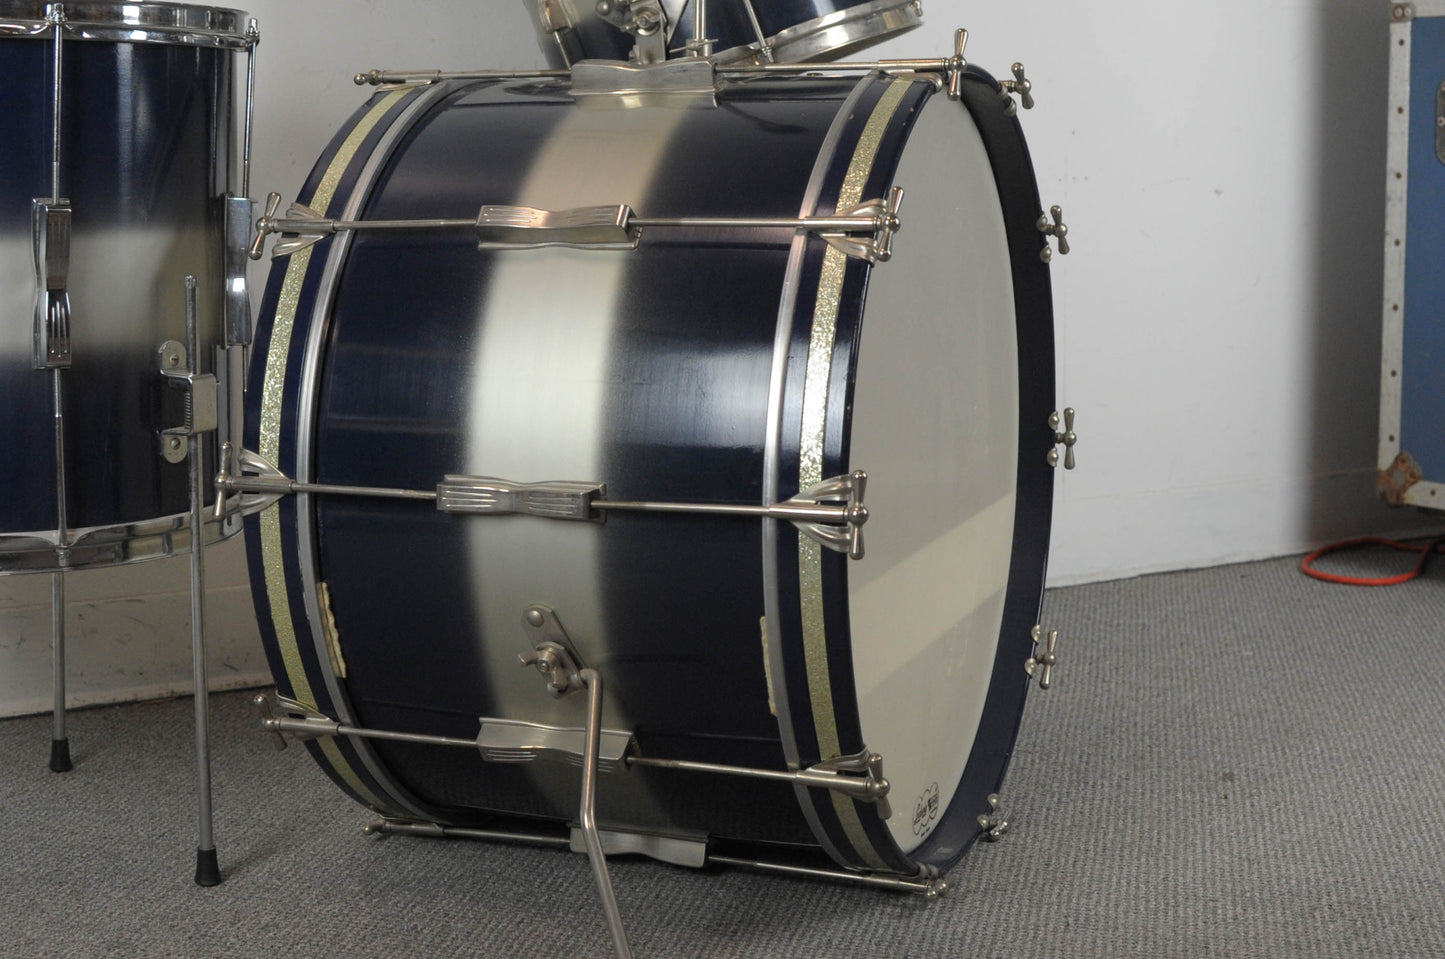 1960s Ludwig Club Date Blue & Silver Duco Drum Set